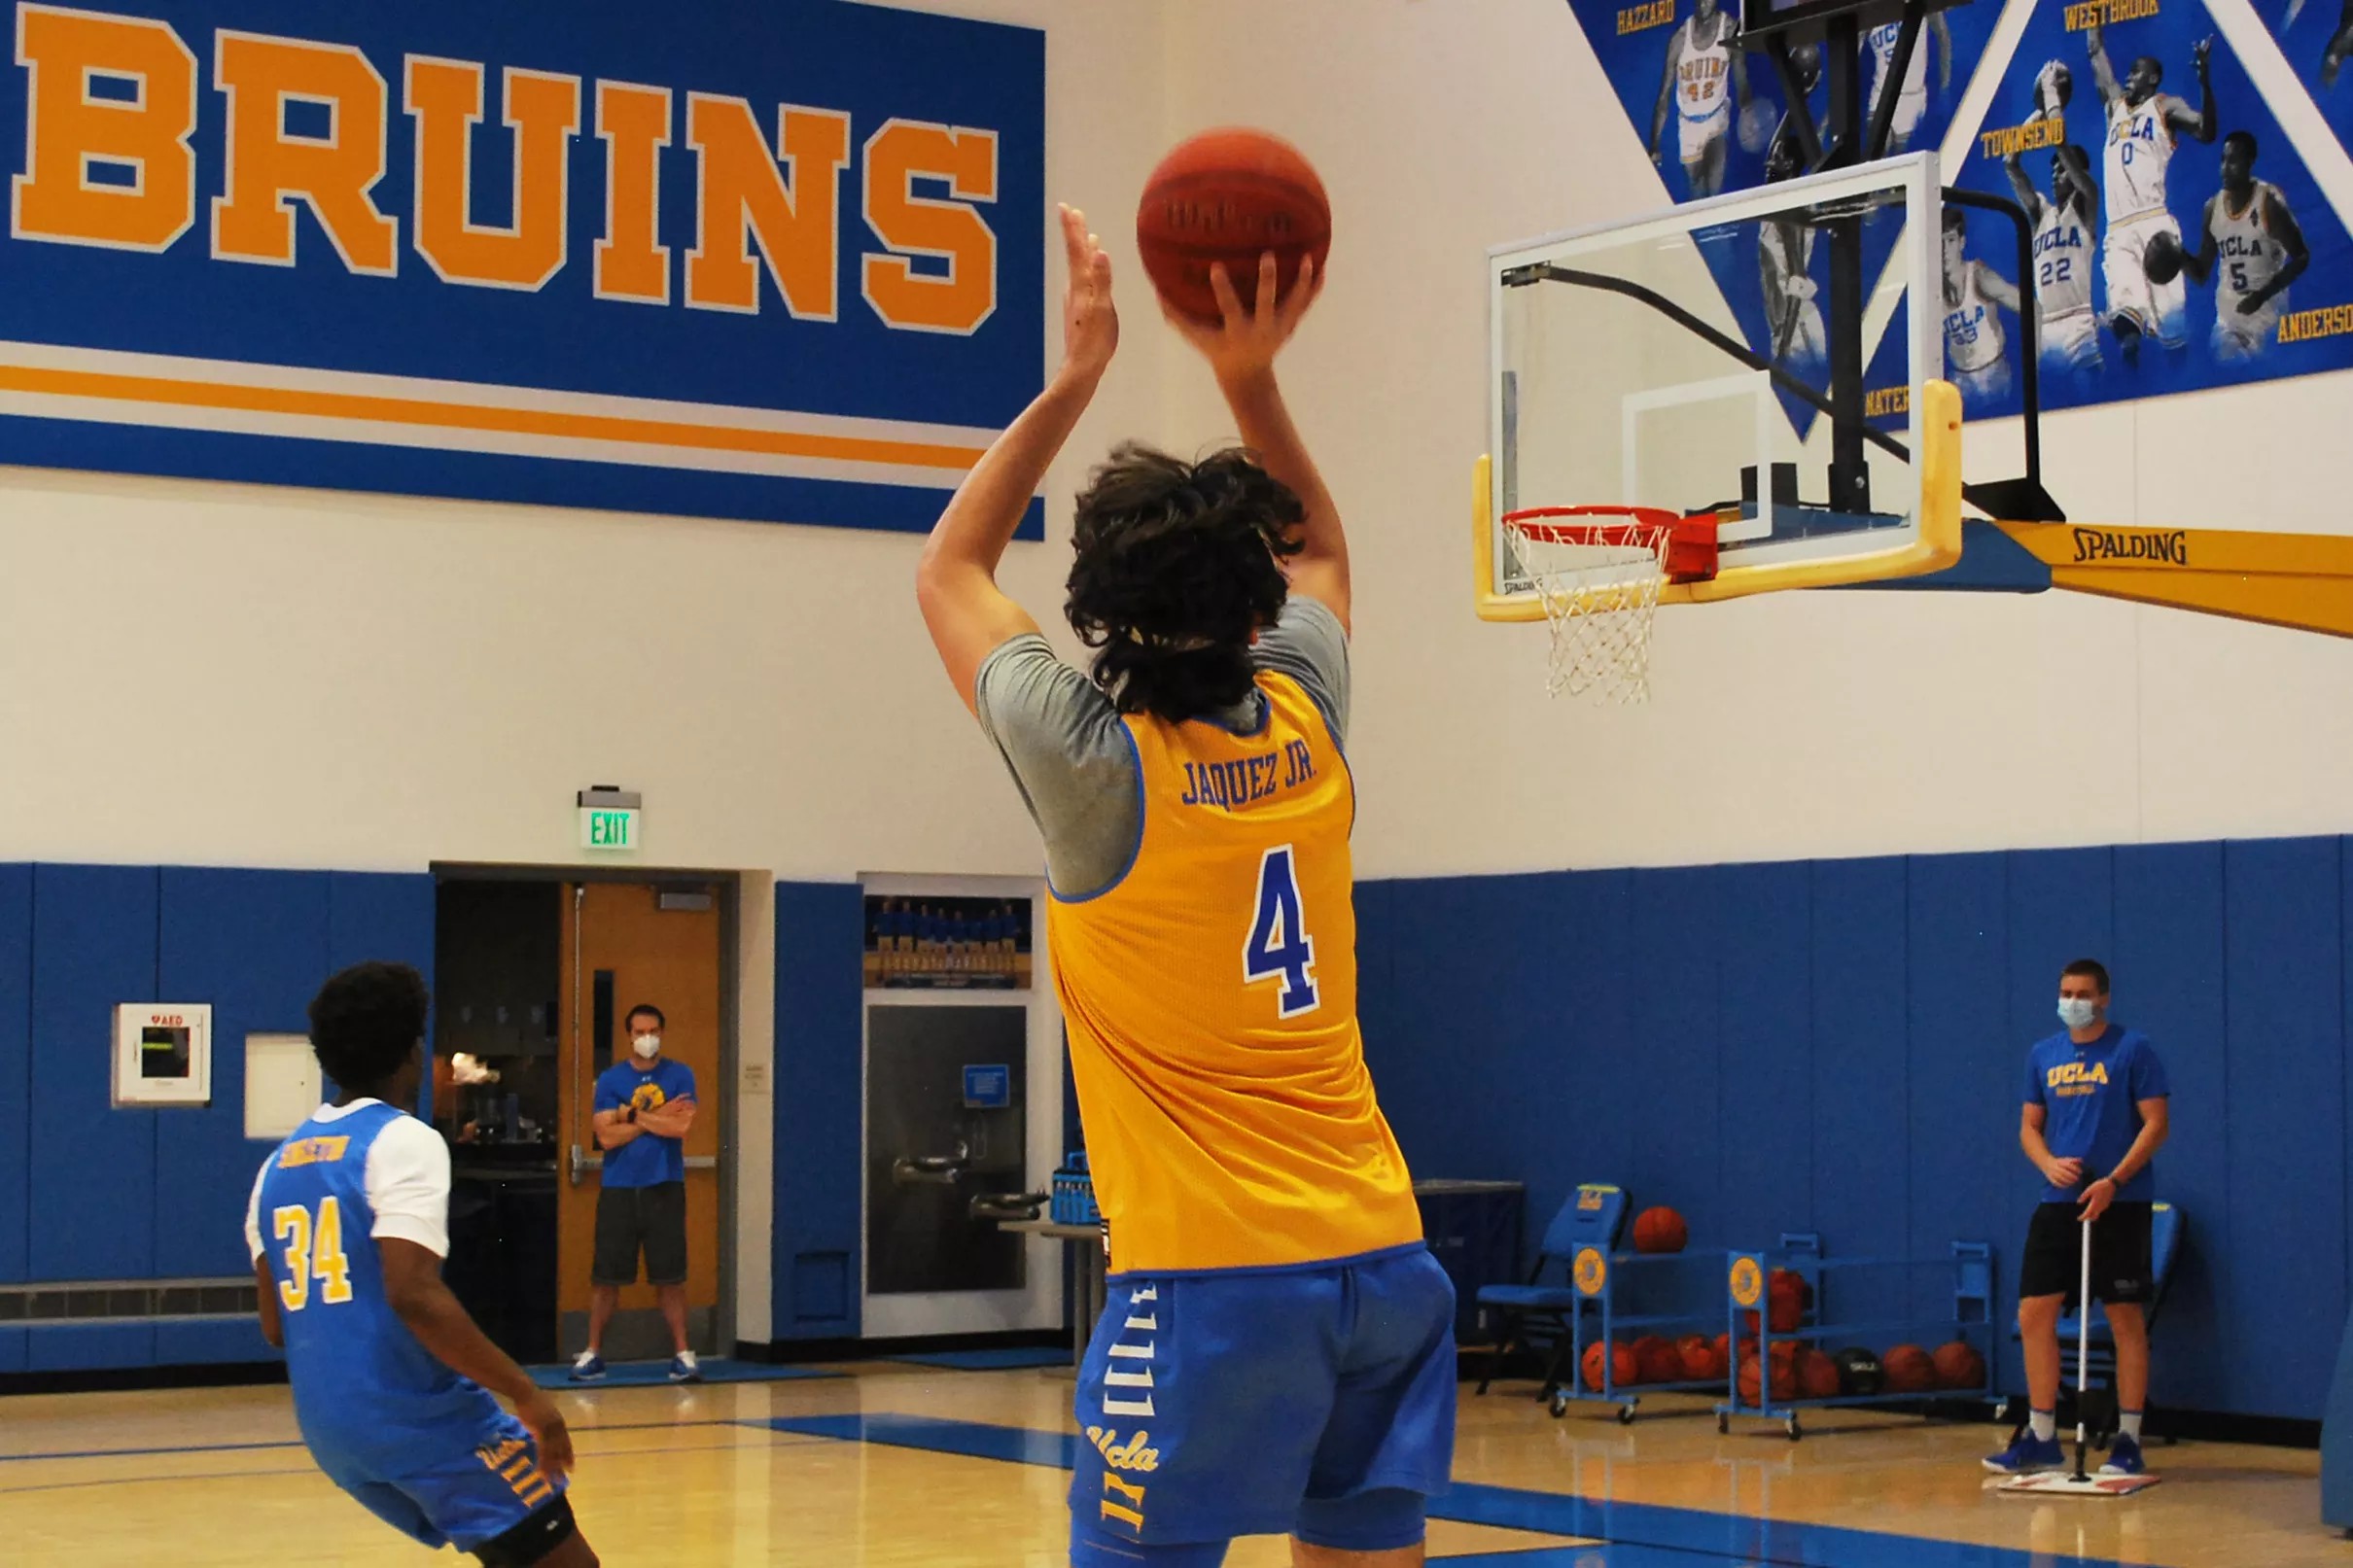 UCLA Basketball workout photos tease what’s to come in 202021